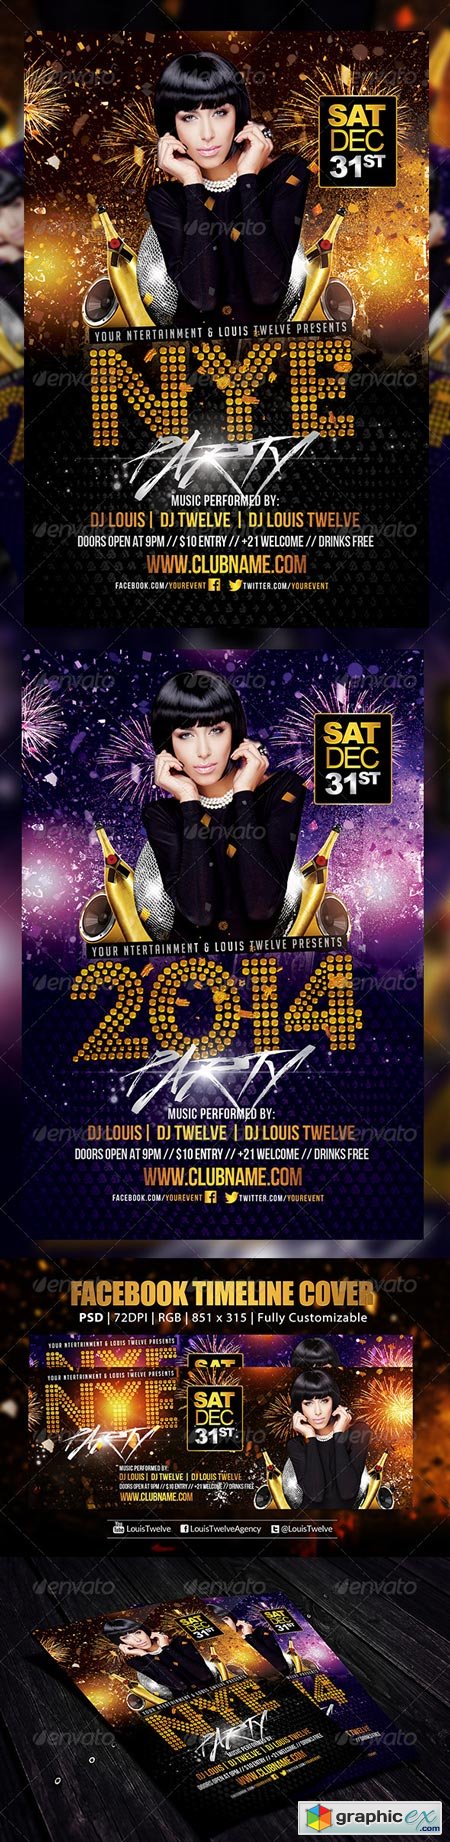 NYE Party 3 Flyer + FB Cover 6193128